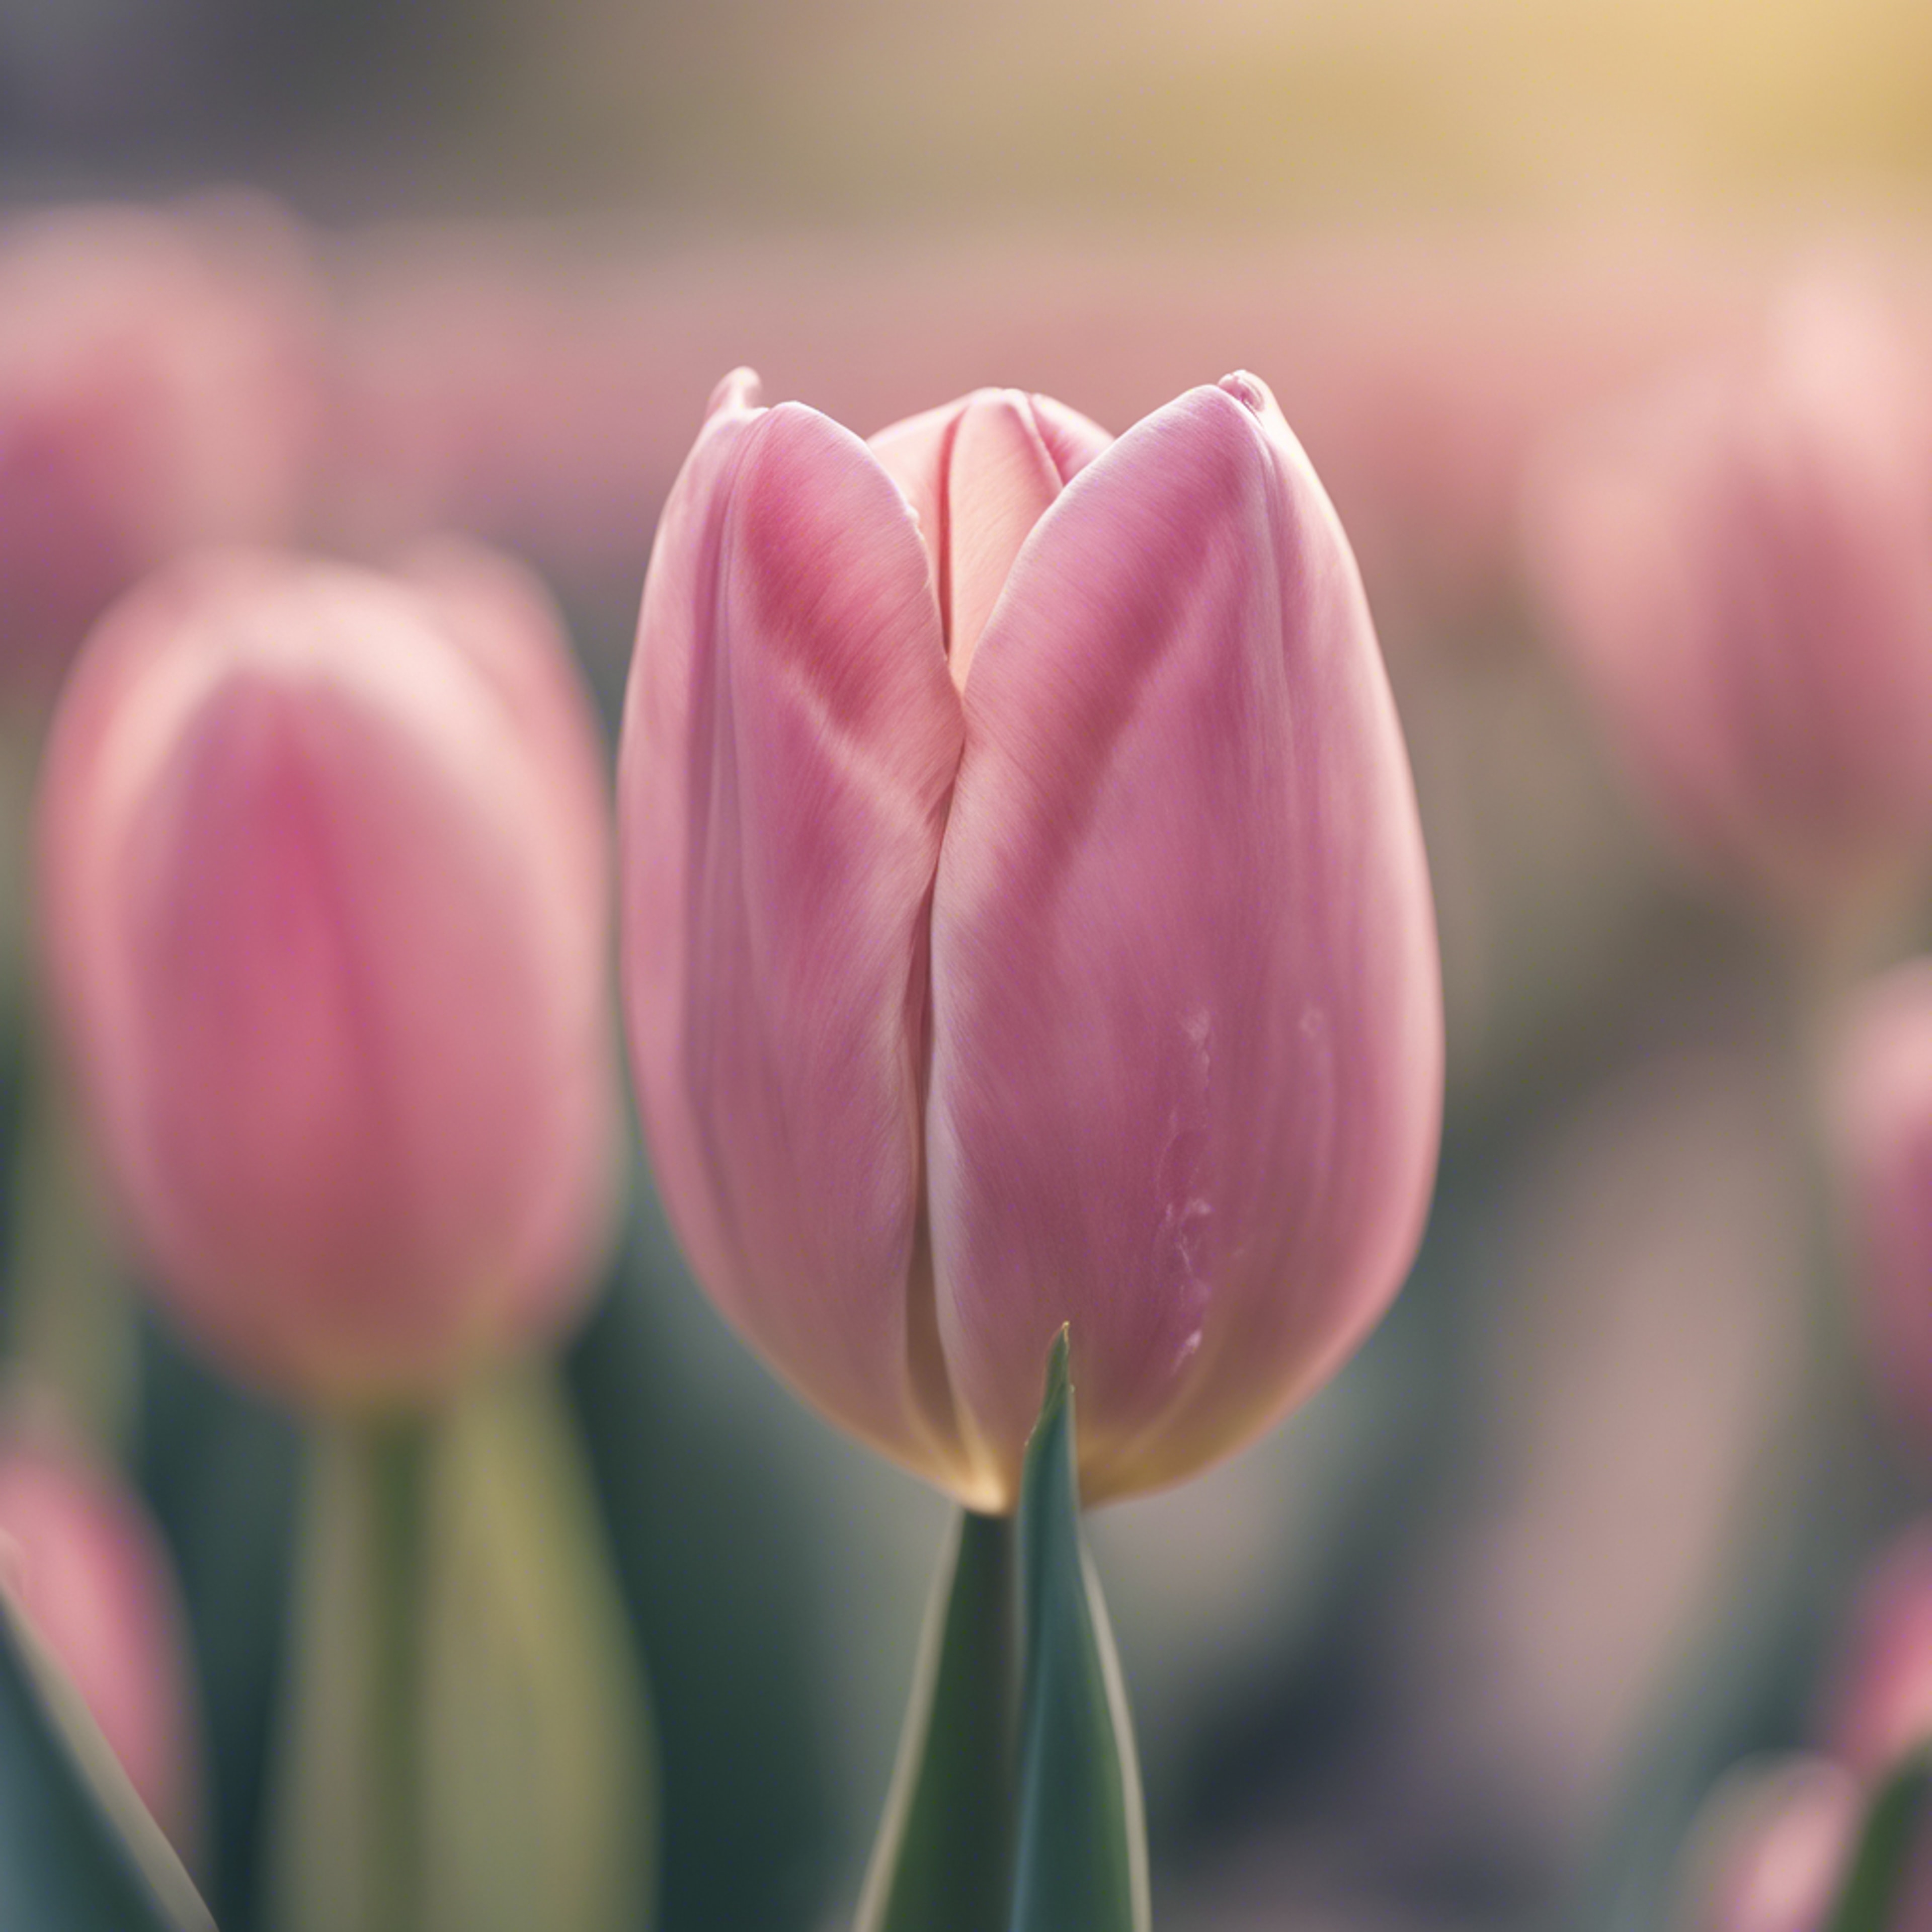 A close-up of a lone pink tulip against a soft and blurry pastel background Тапет[4132f8cb968043e28bd5]